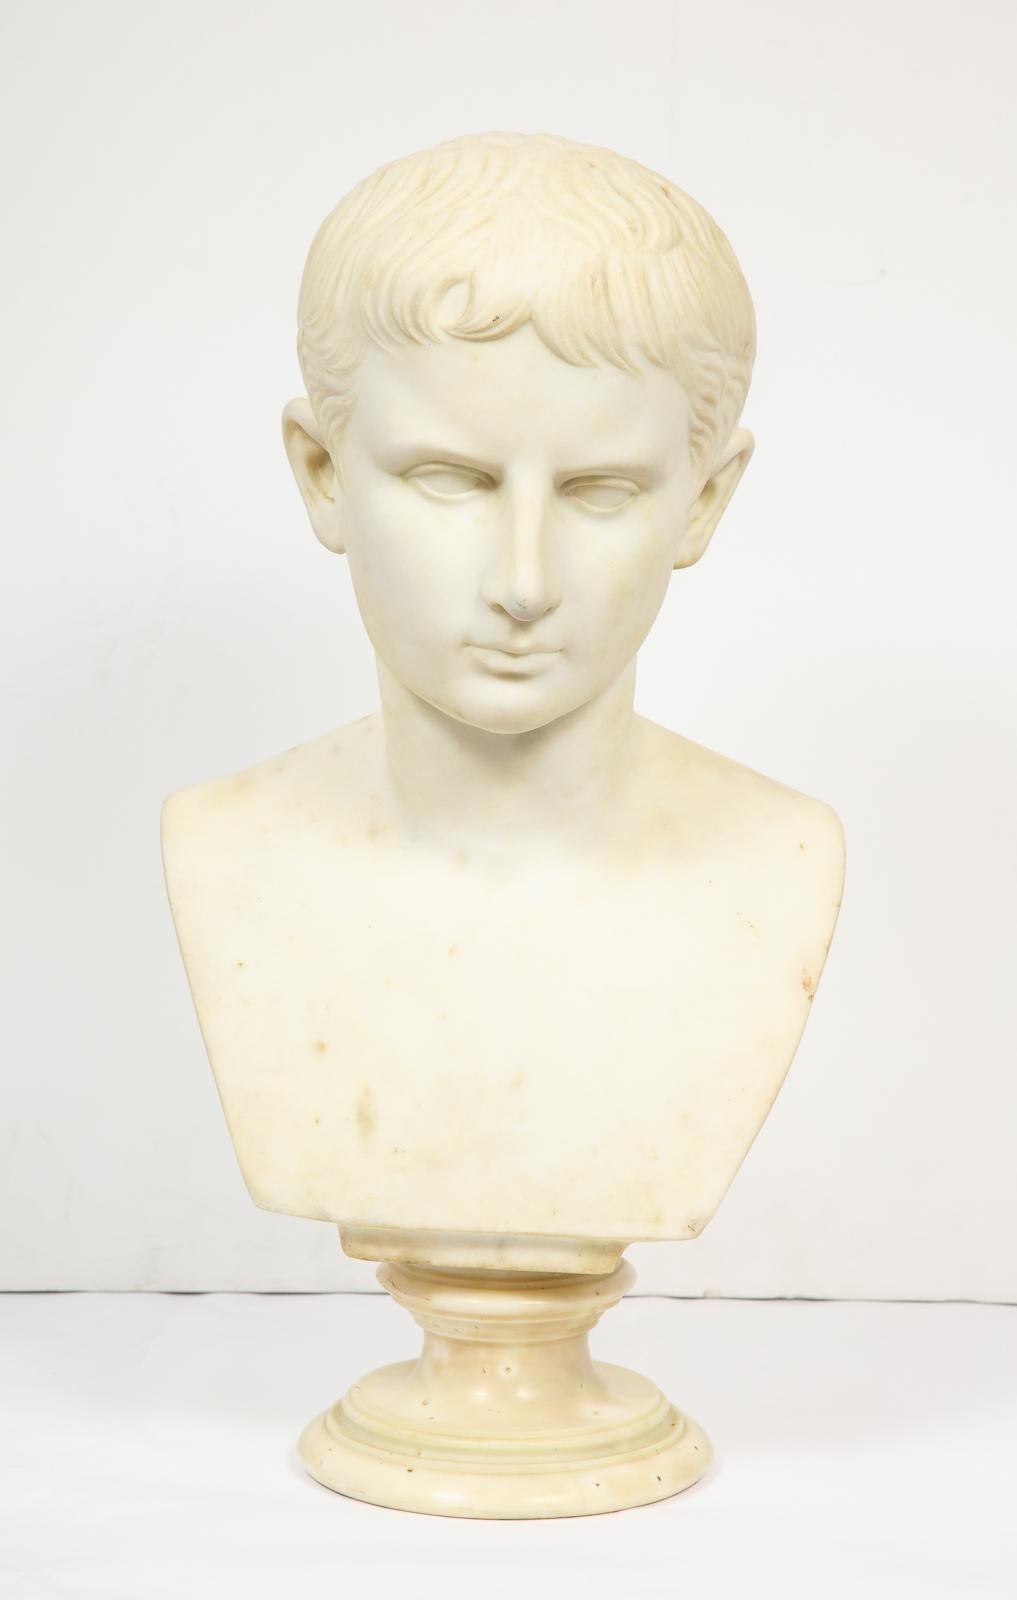 A fine Italian Grand Tour white marble figural bust of Augustus Caesar,
Rome, circa 1875.

Very nice quality marble bust of Augustus Caesar, unsigned.

Good condition, needs to be cleaned, minor chips to the round socle base.

Measures: 21